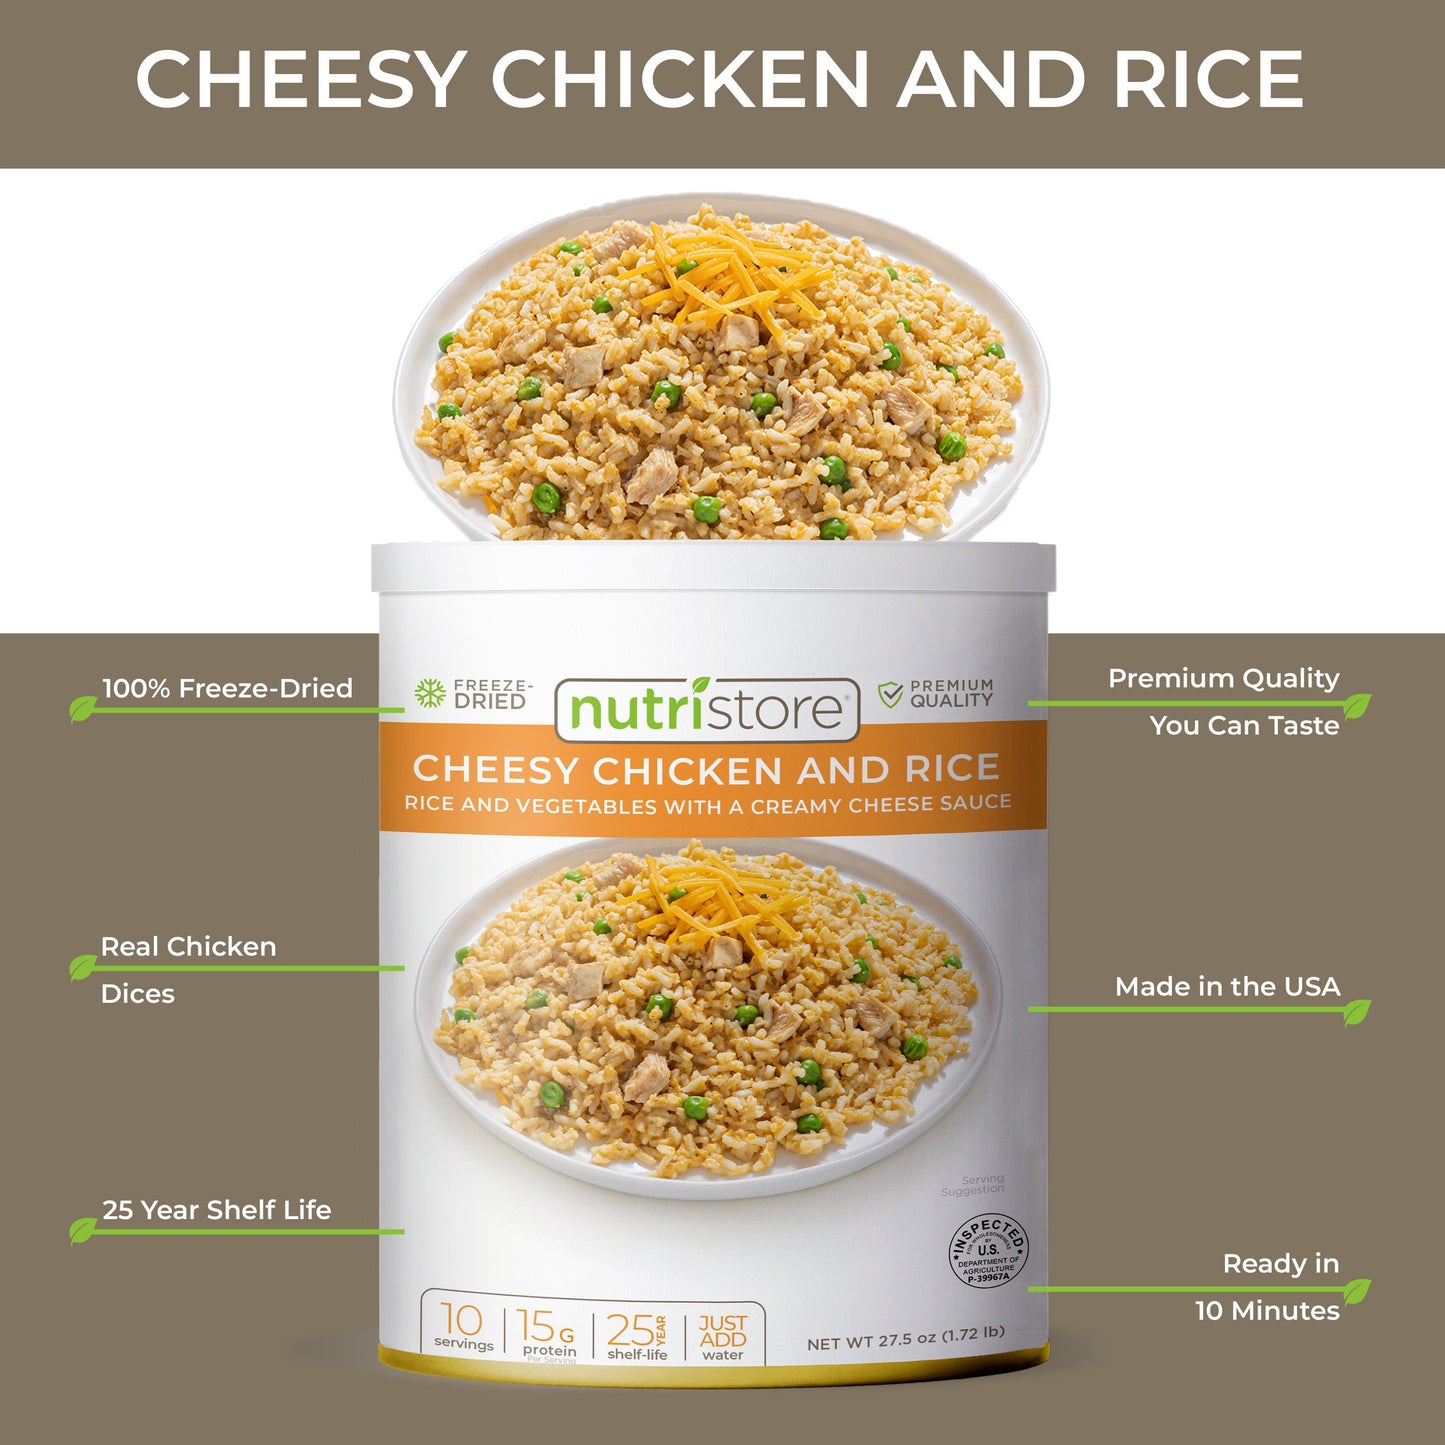 Cheesy Chicken and Rice - #10 Can by Nutristore